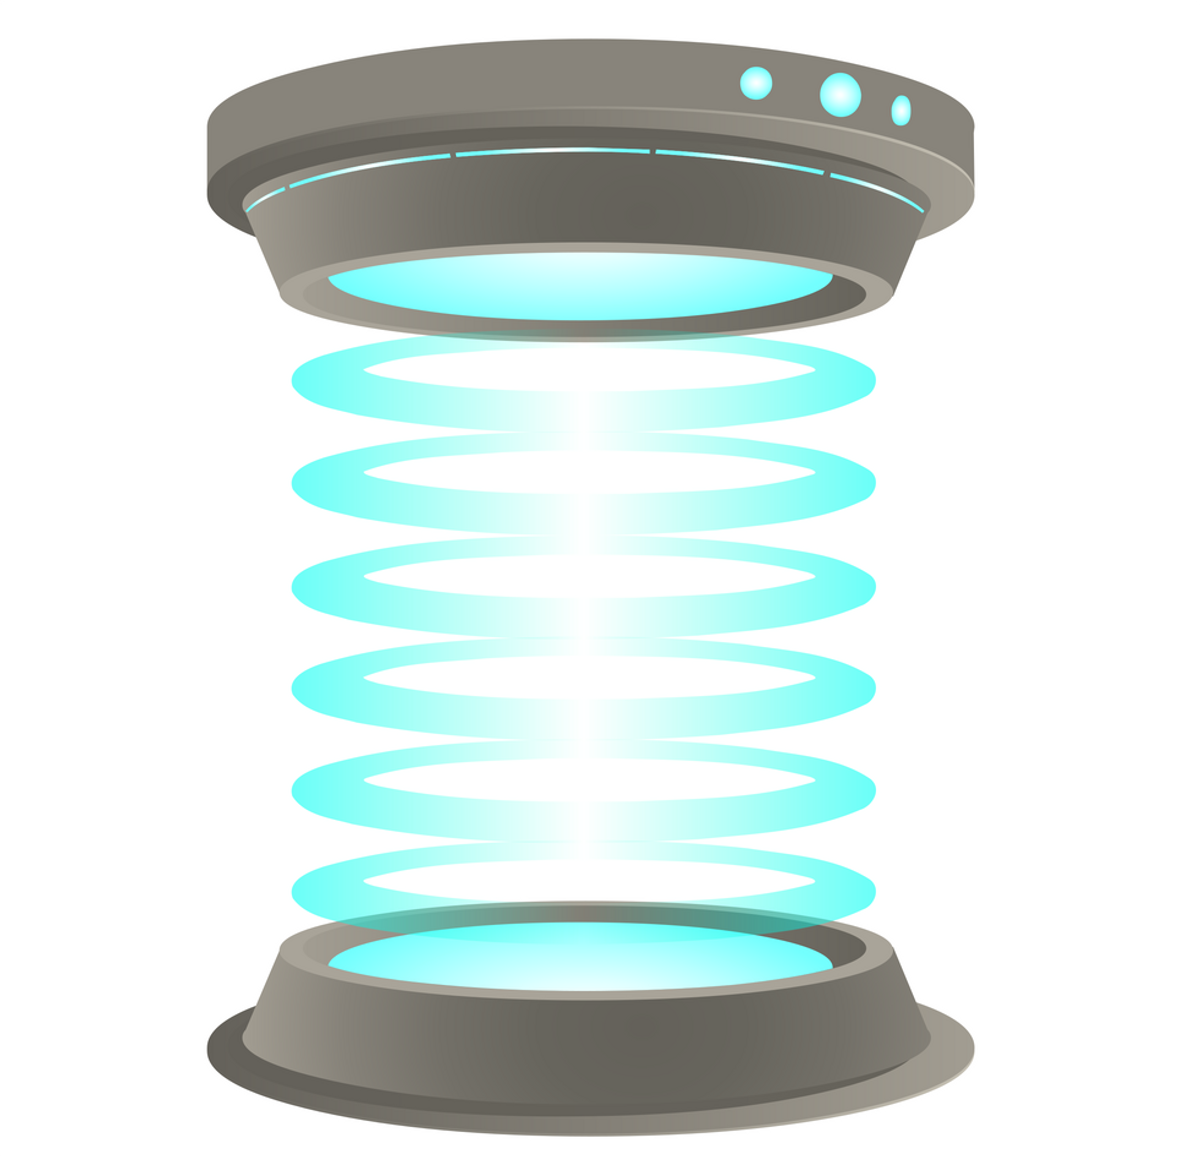 The Science Behind Teleporters